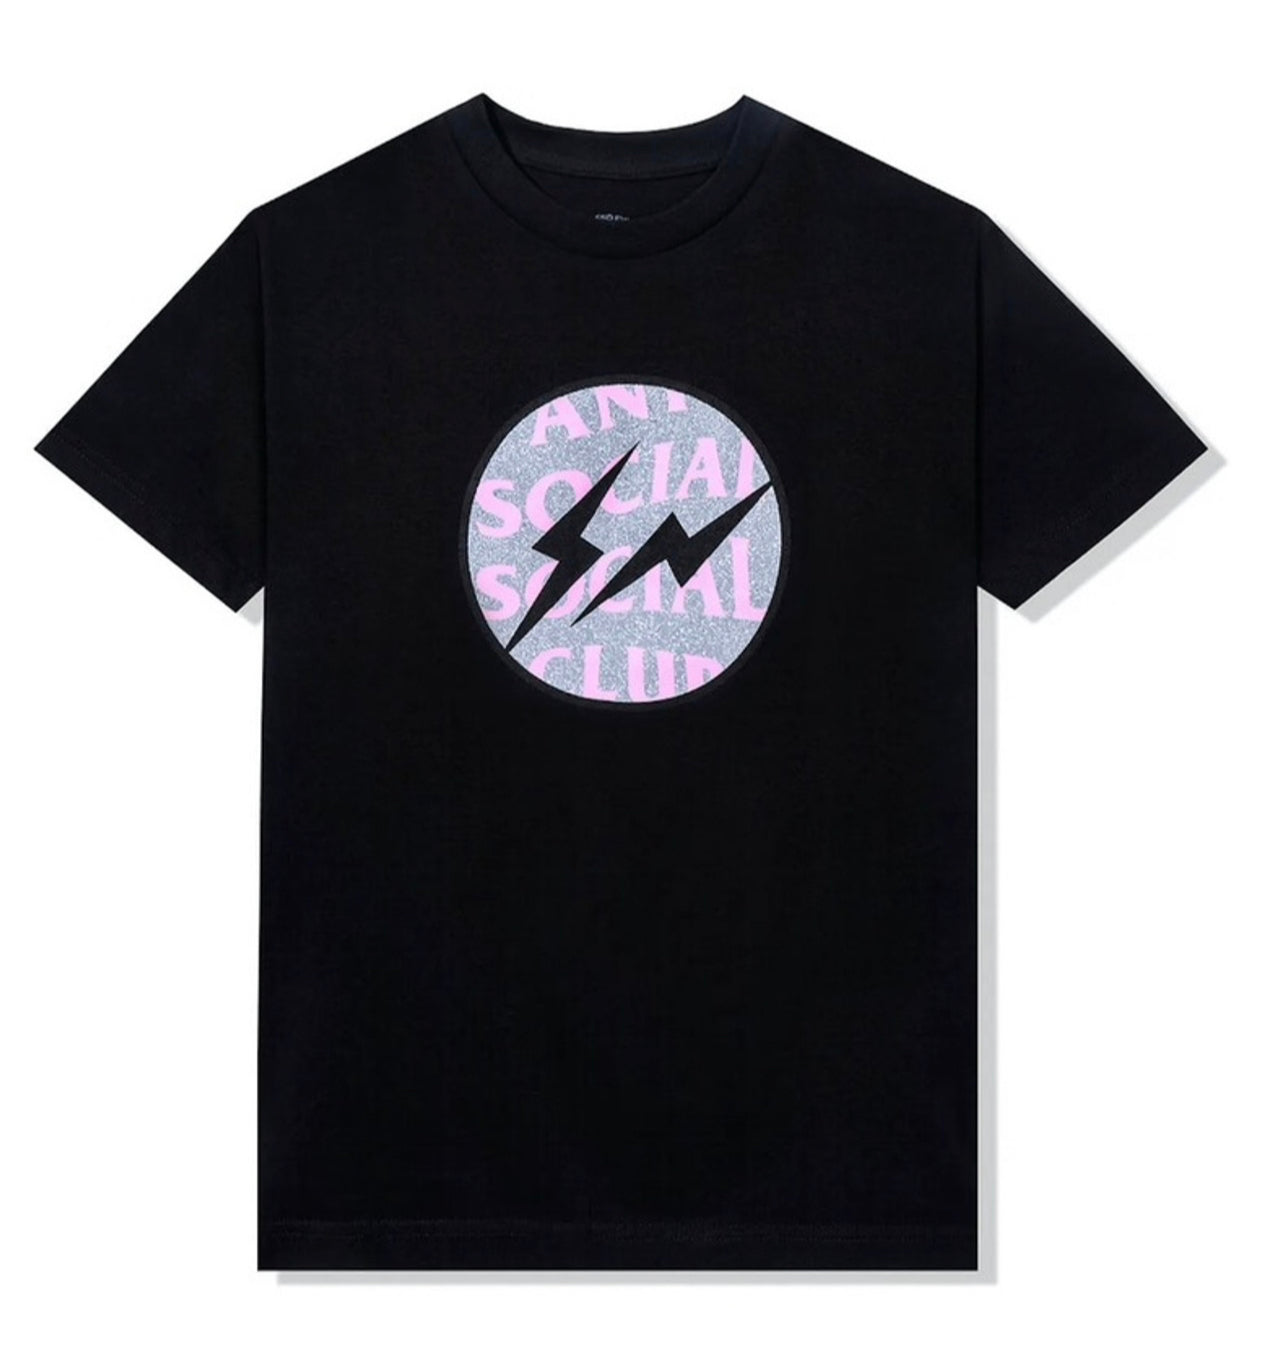 Anti social social club Fragment called interference black tee